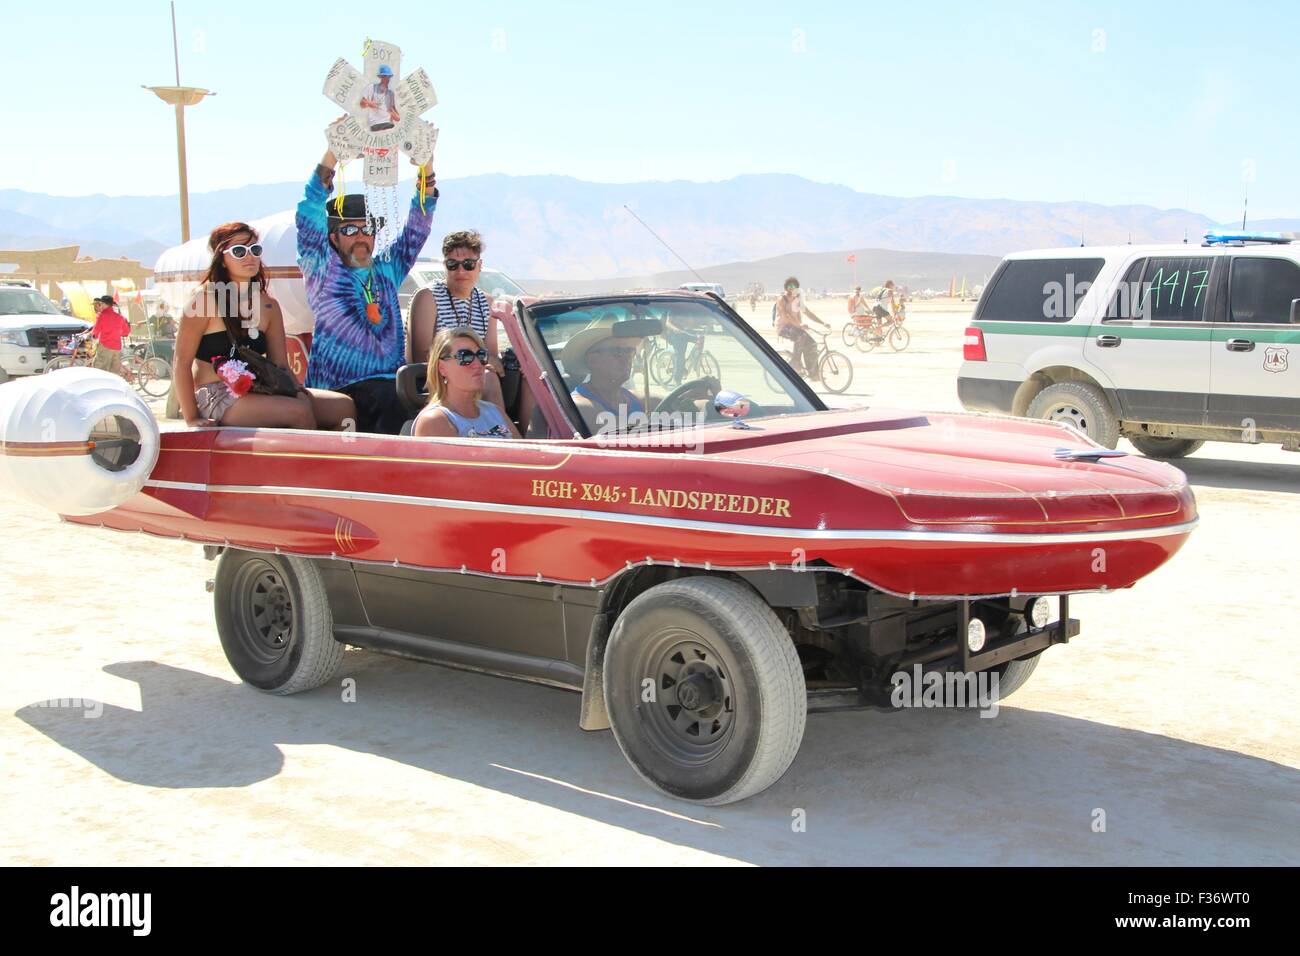 Burners ride an ampibcar in the playa during the annual Burning Man festival in the desert August 27, 2014 in Black Rock City, Nevada. Stock Photo